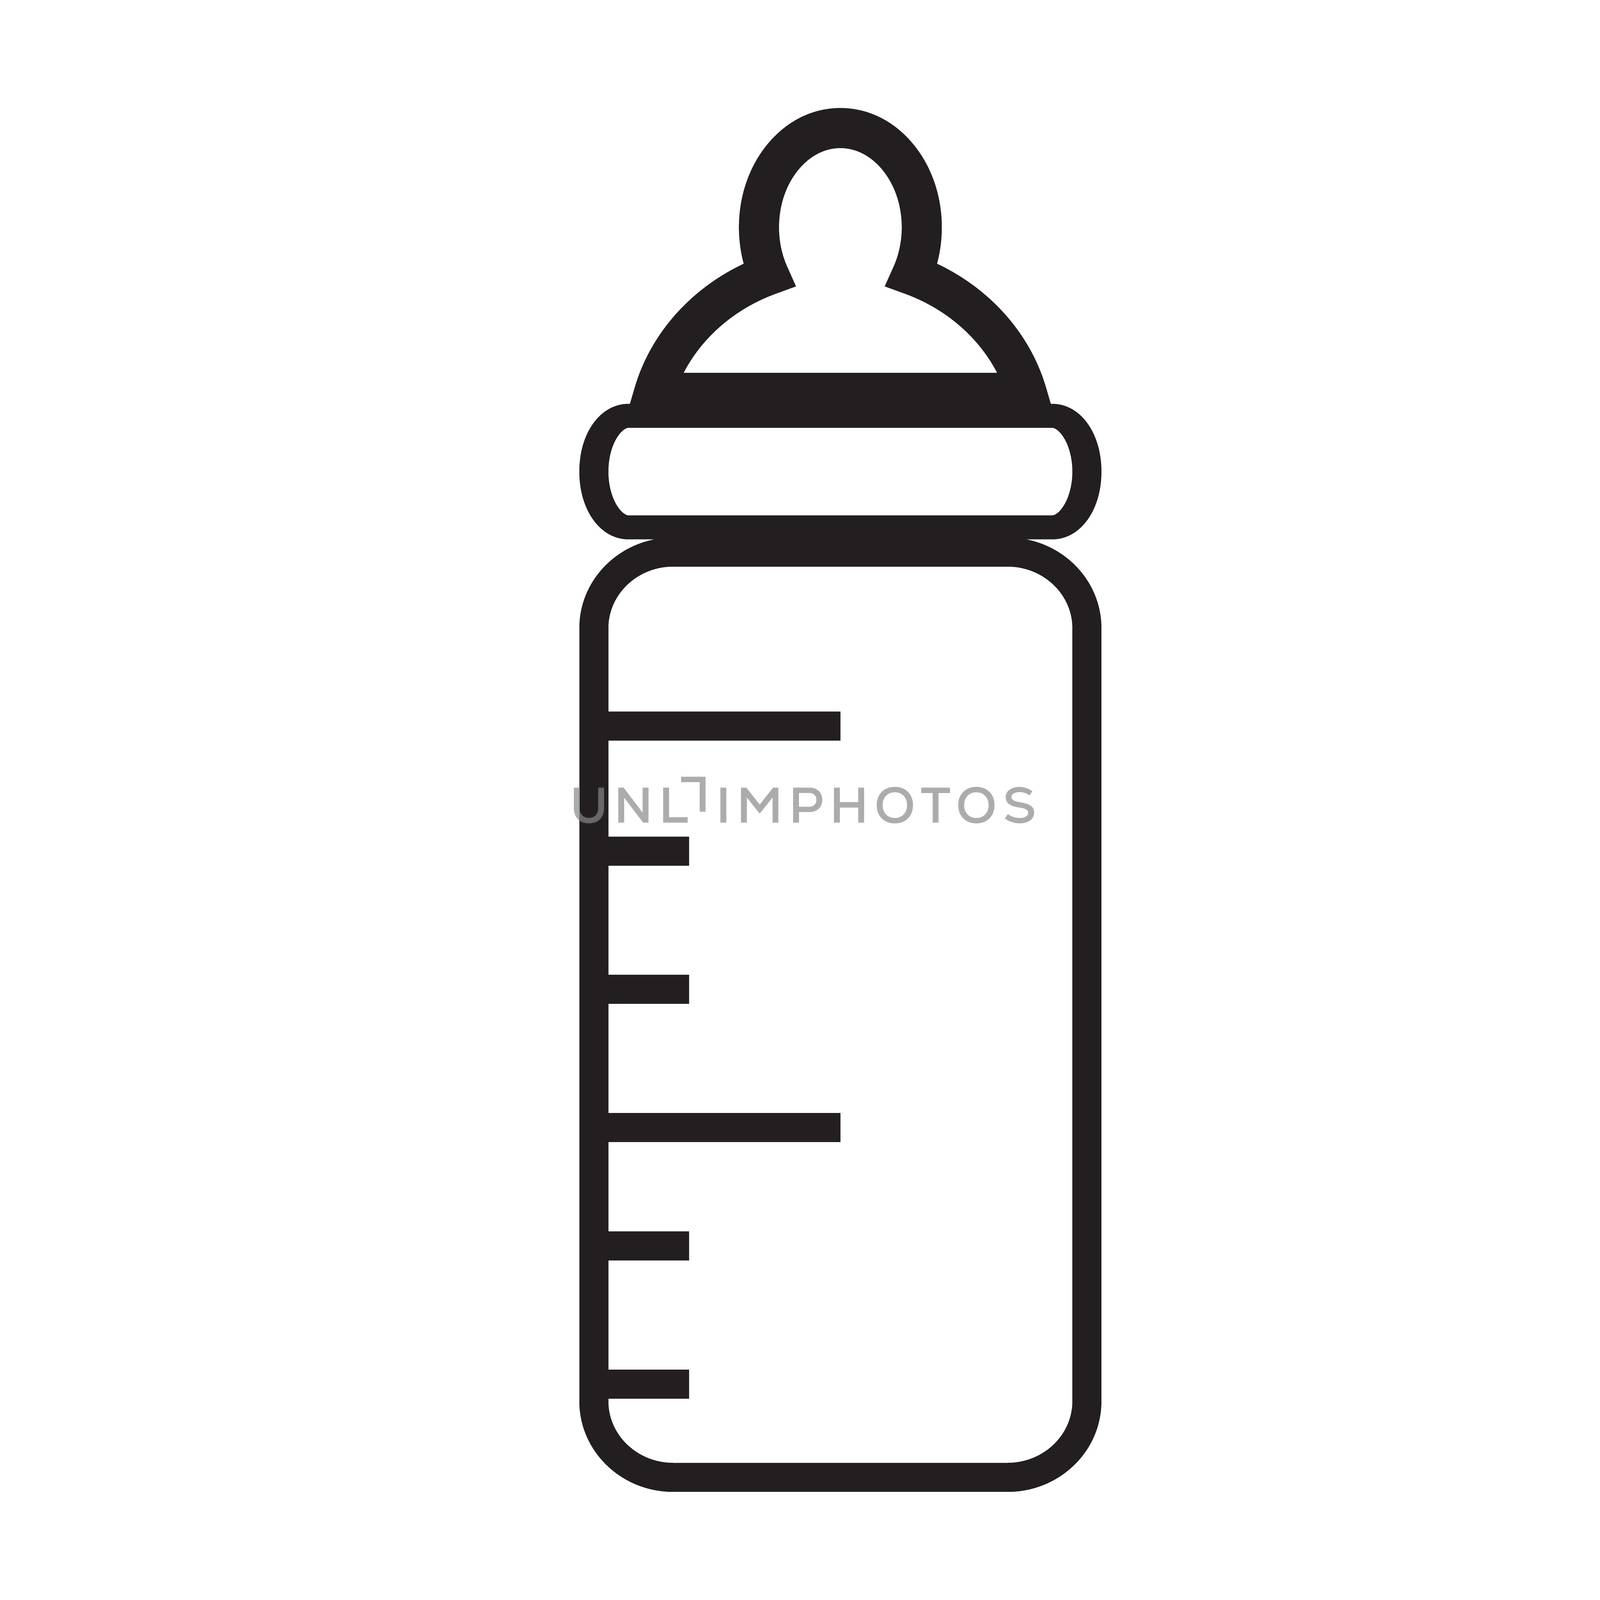 baby bottle icon on white background. flat style. baby bottle icon for your web site design, logo, app, UI. baby bottle sign.